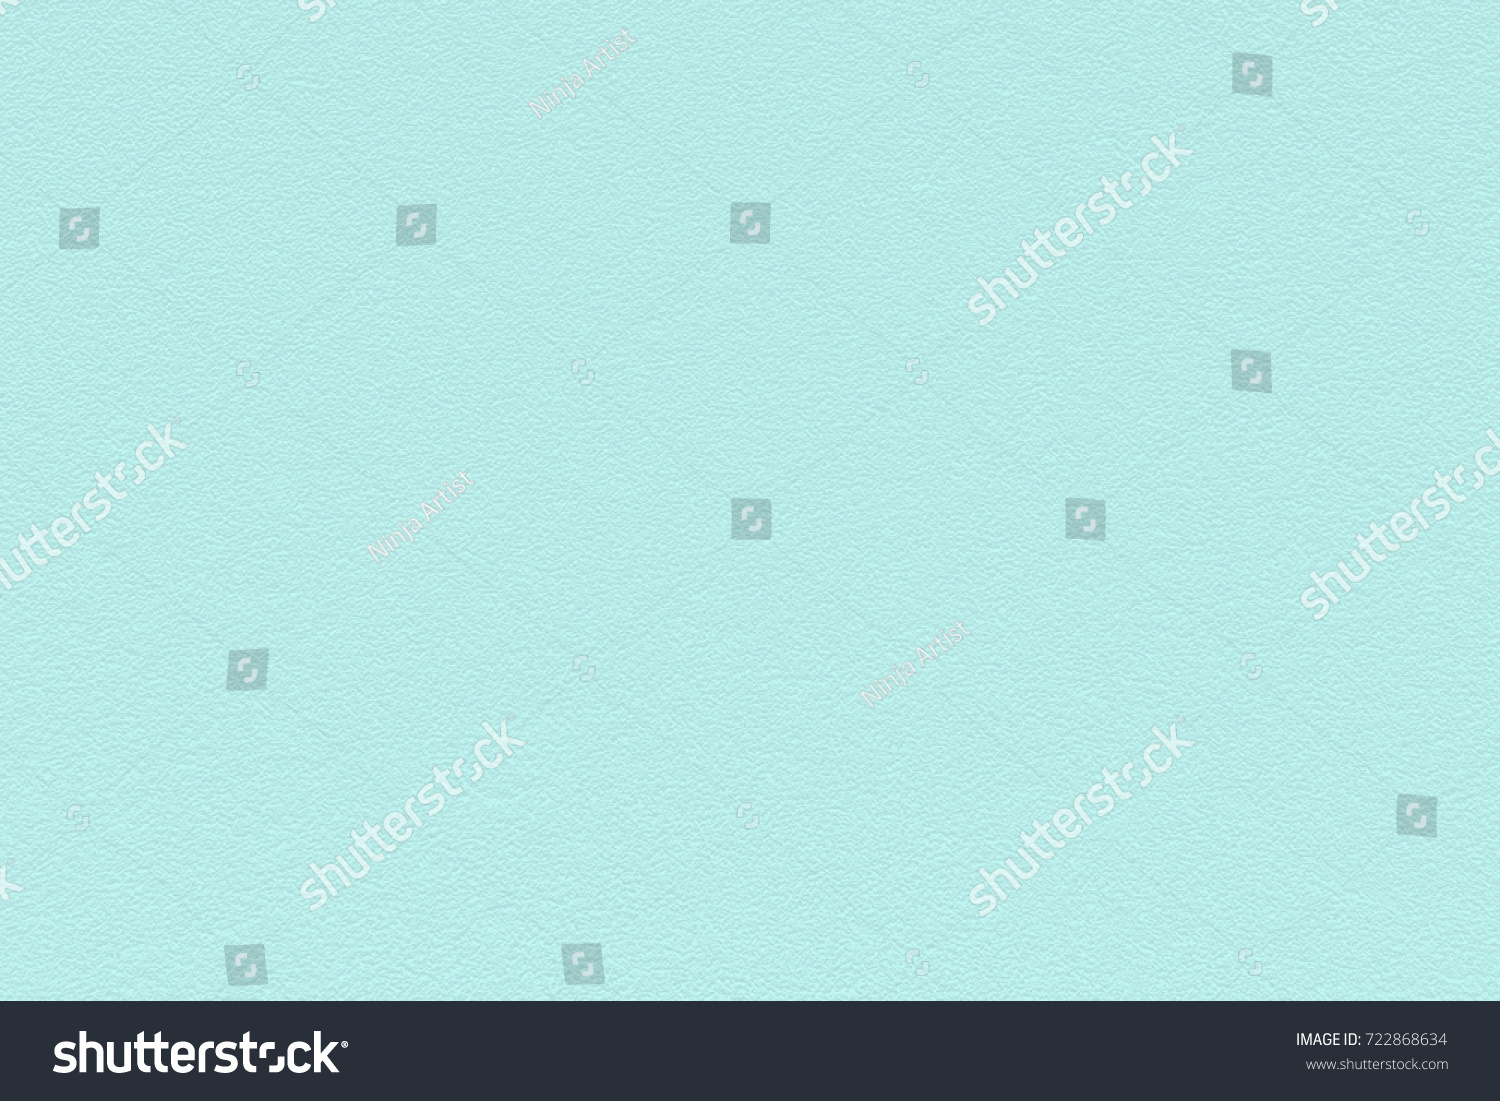 Soft light blue color texture pattern abstract background can be use as wall paper screen saver brochure cover page or for presentations background or article background also have copy space for text. #722868634